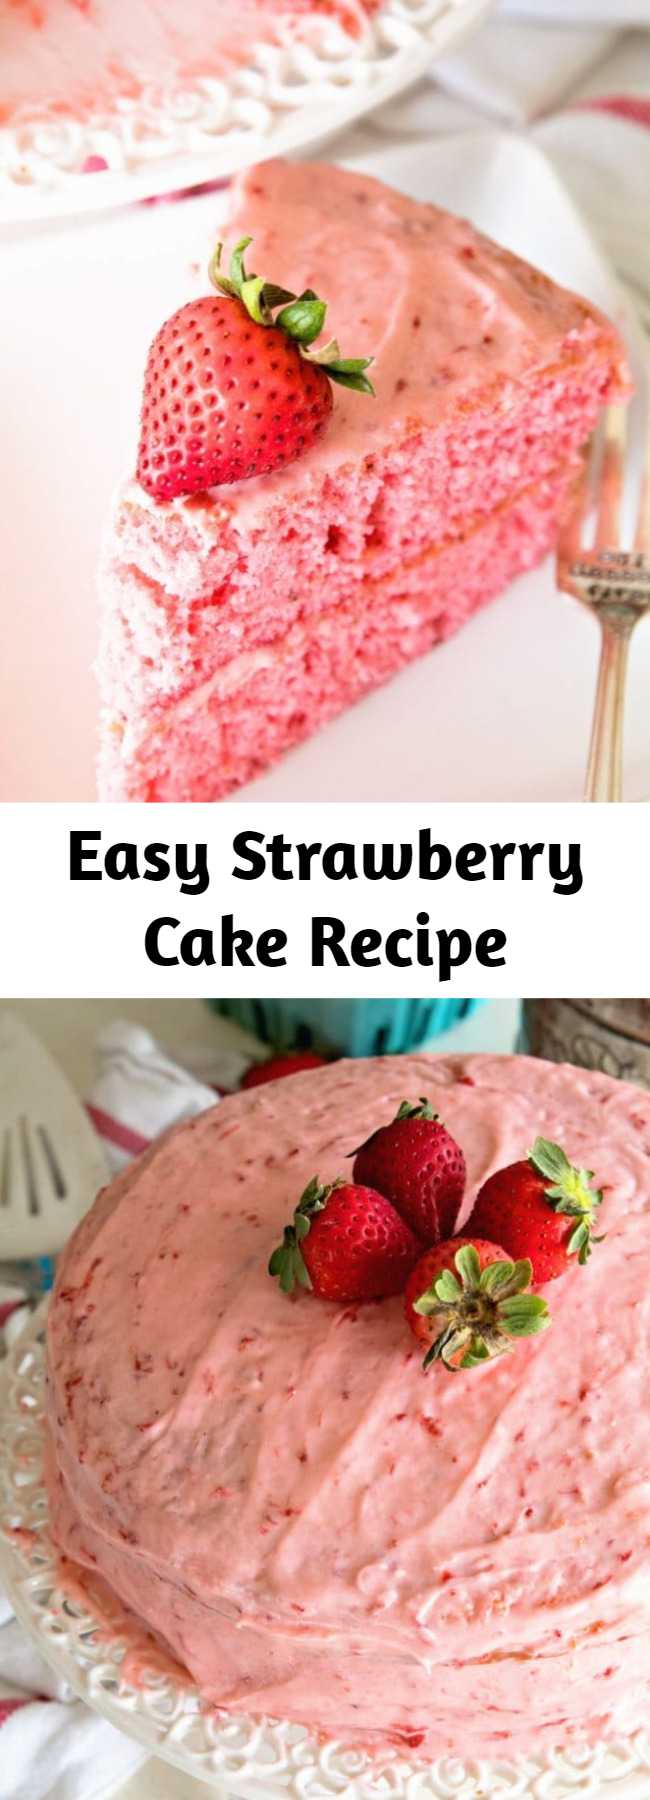 Easy Strawberry Cake Recipe - Starts with a Boxed Mix and is Dressed Up Fresh Strawberries and Iced with a Fresh Strawberry Frosting!